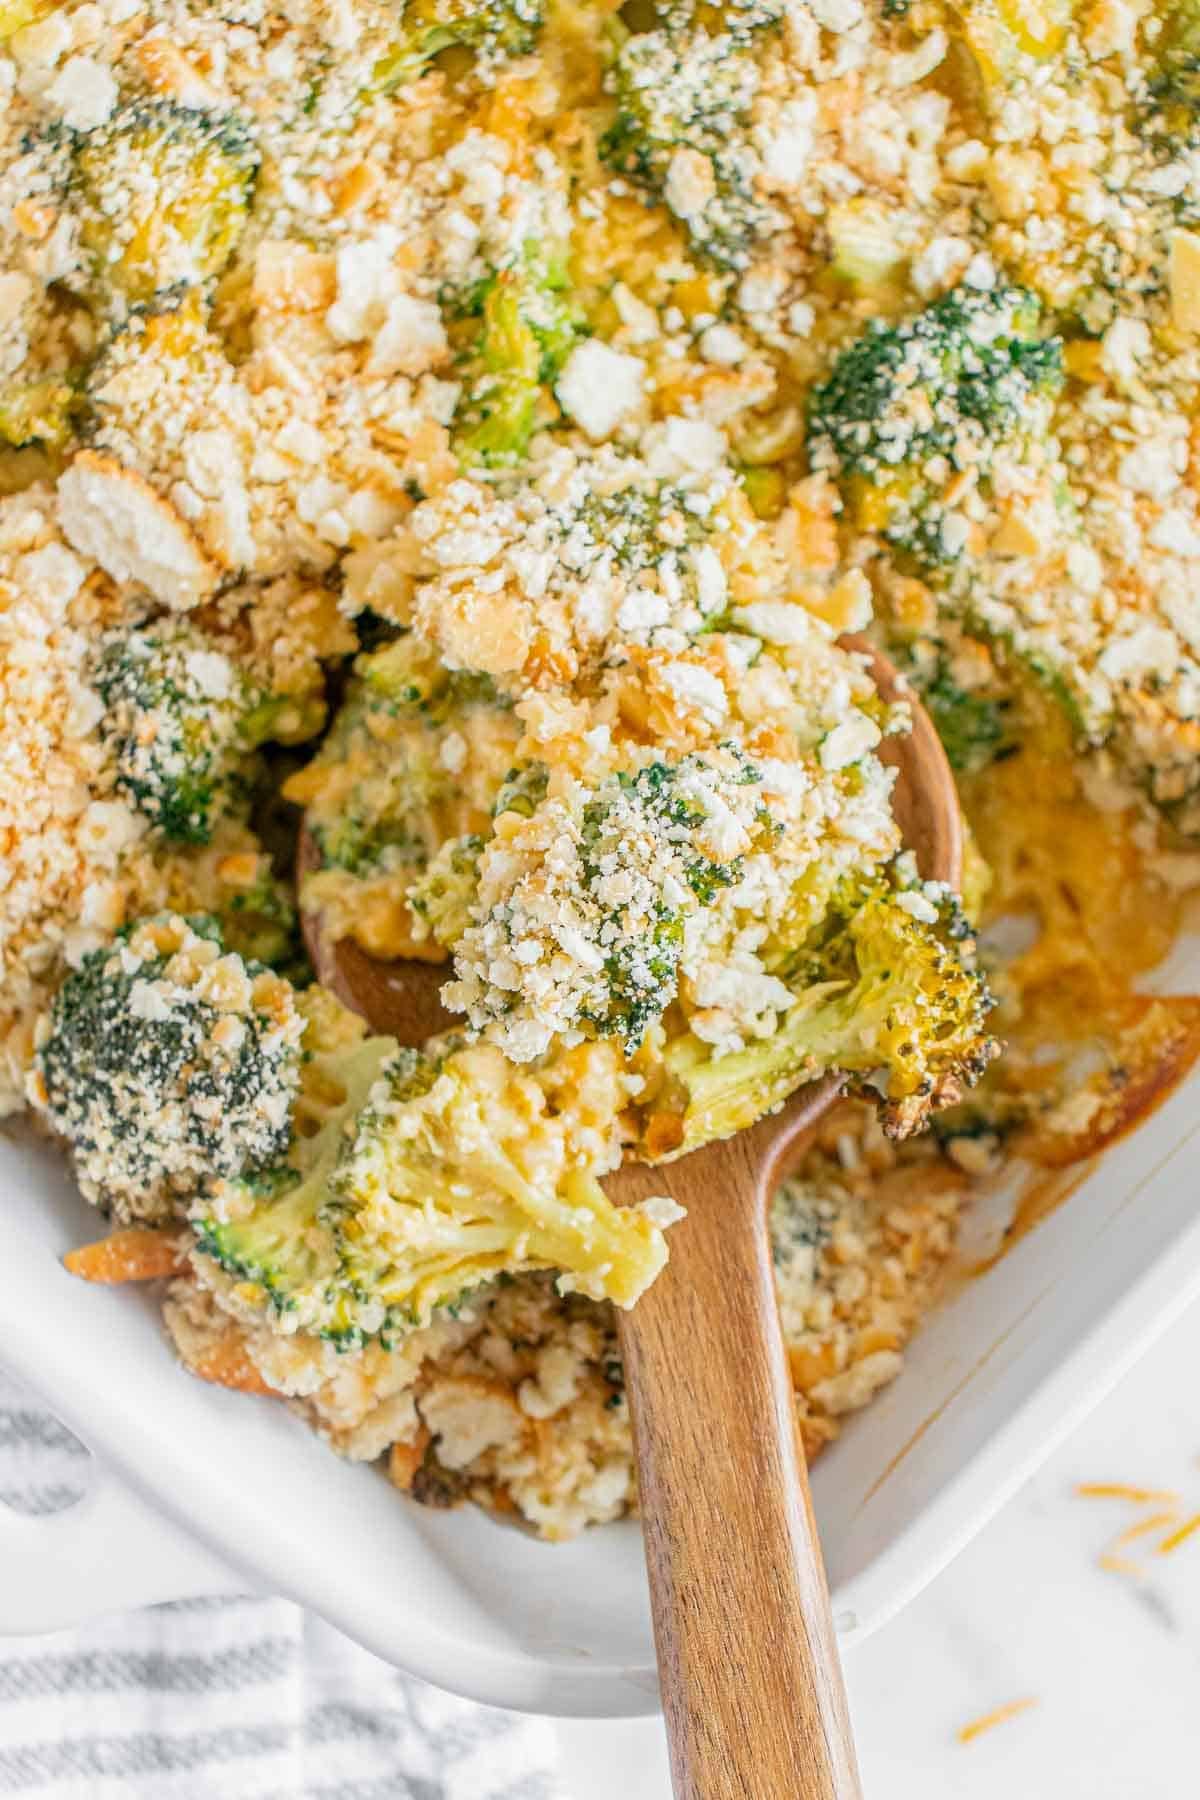 Broccoli casserole in a white dish with a wooden spoon scooping it out.